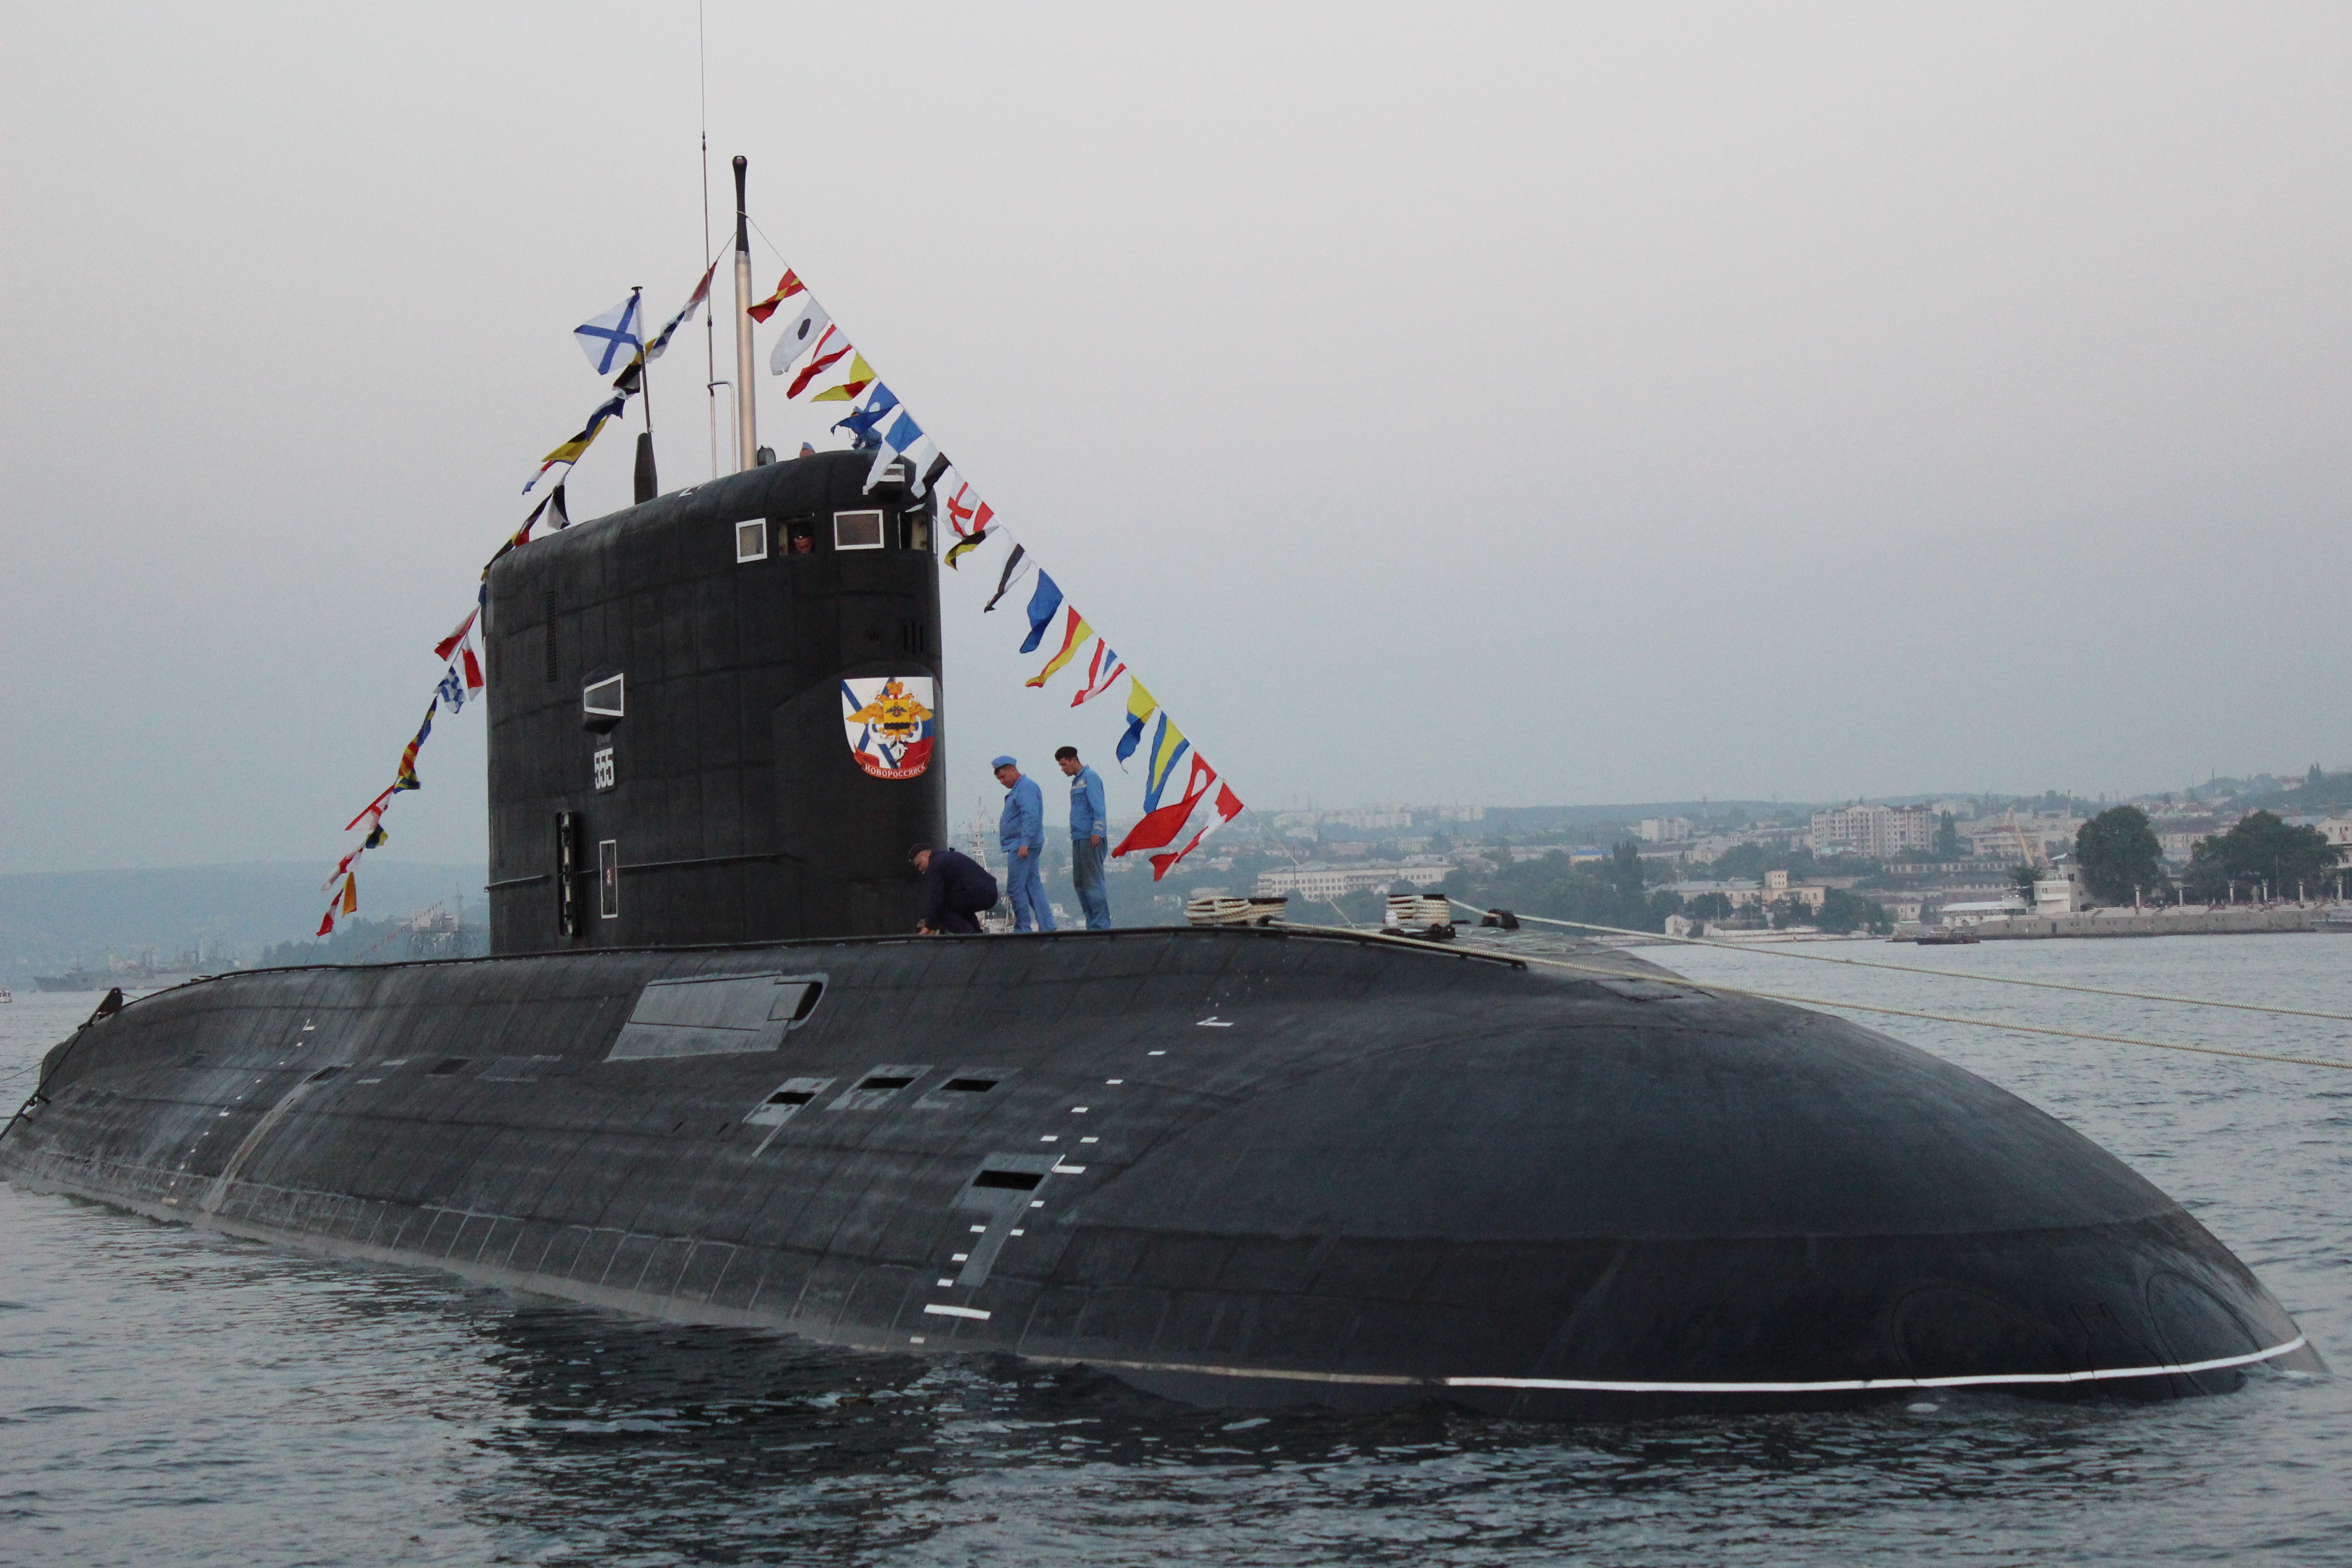 A partially submerged black submarine has two people standing on top. The submarine is near shore and the top has many countries' flags flown.